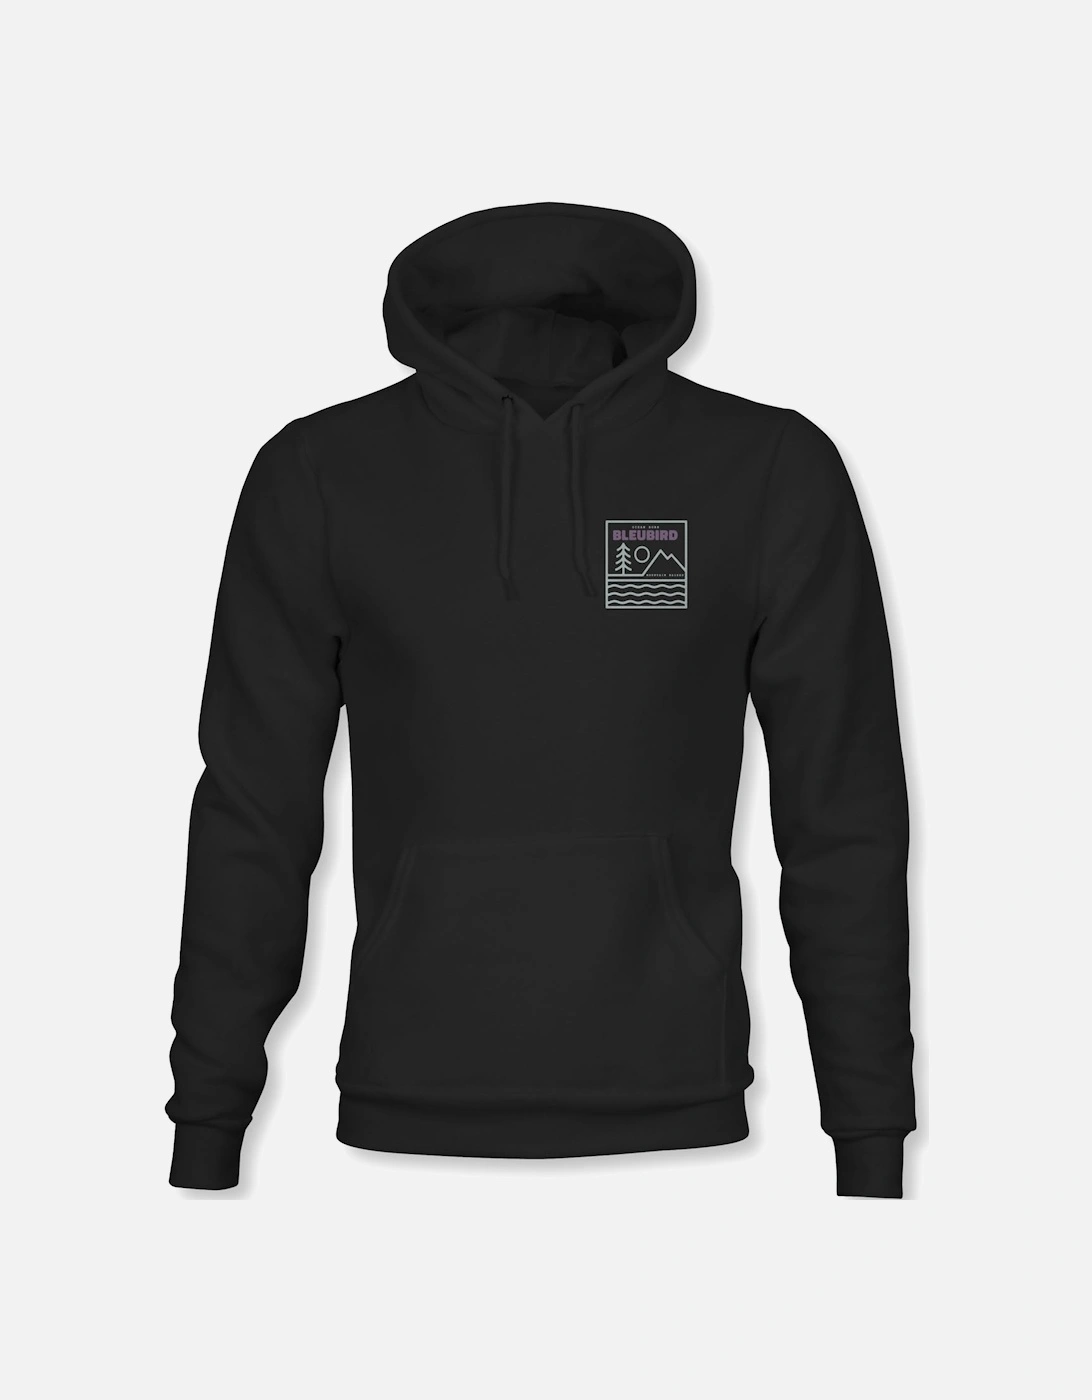 Unisex Campout Pullover Hoodie - Black